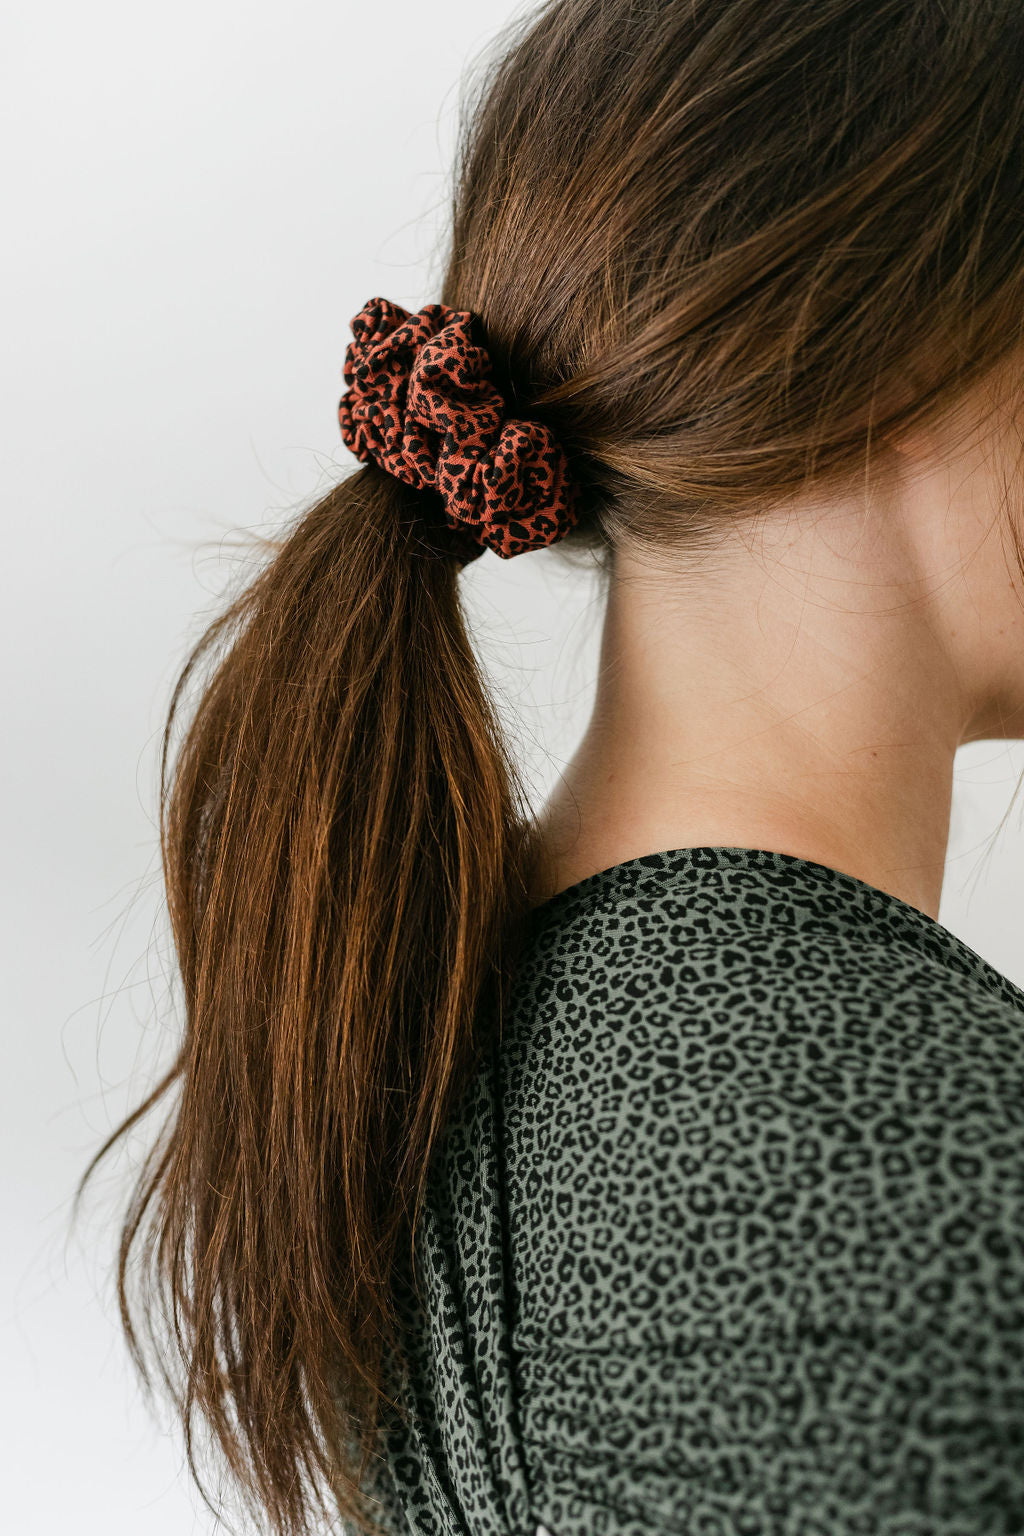 mums-head-with-hair-in-low-ponytail-with-red-leoaprd-print-scrunchie-bon-and-bear